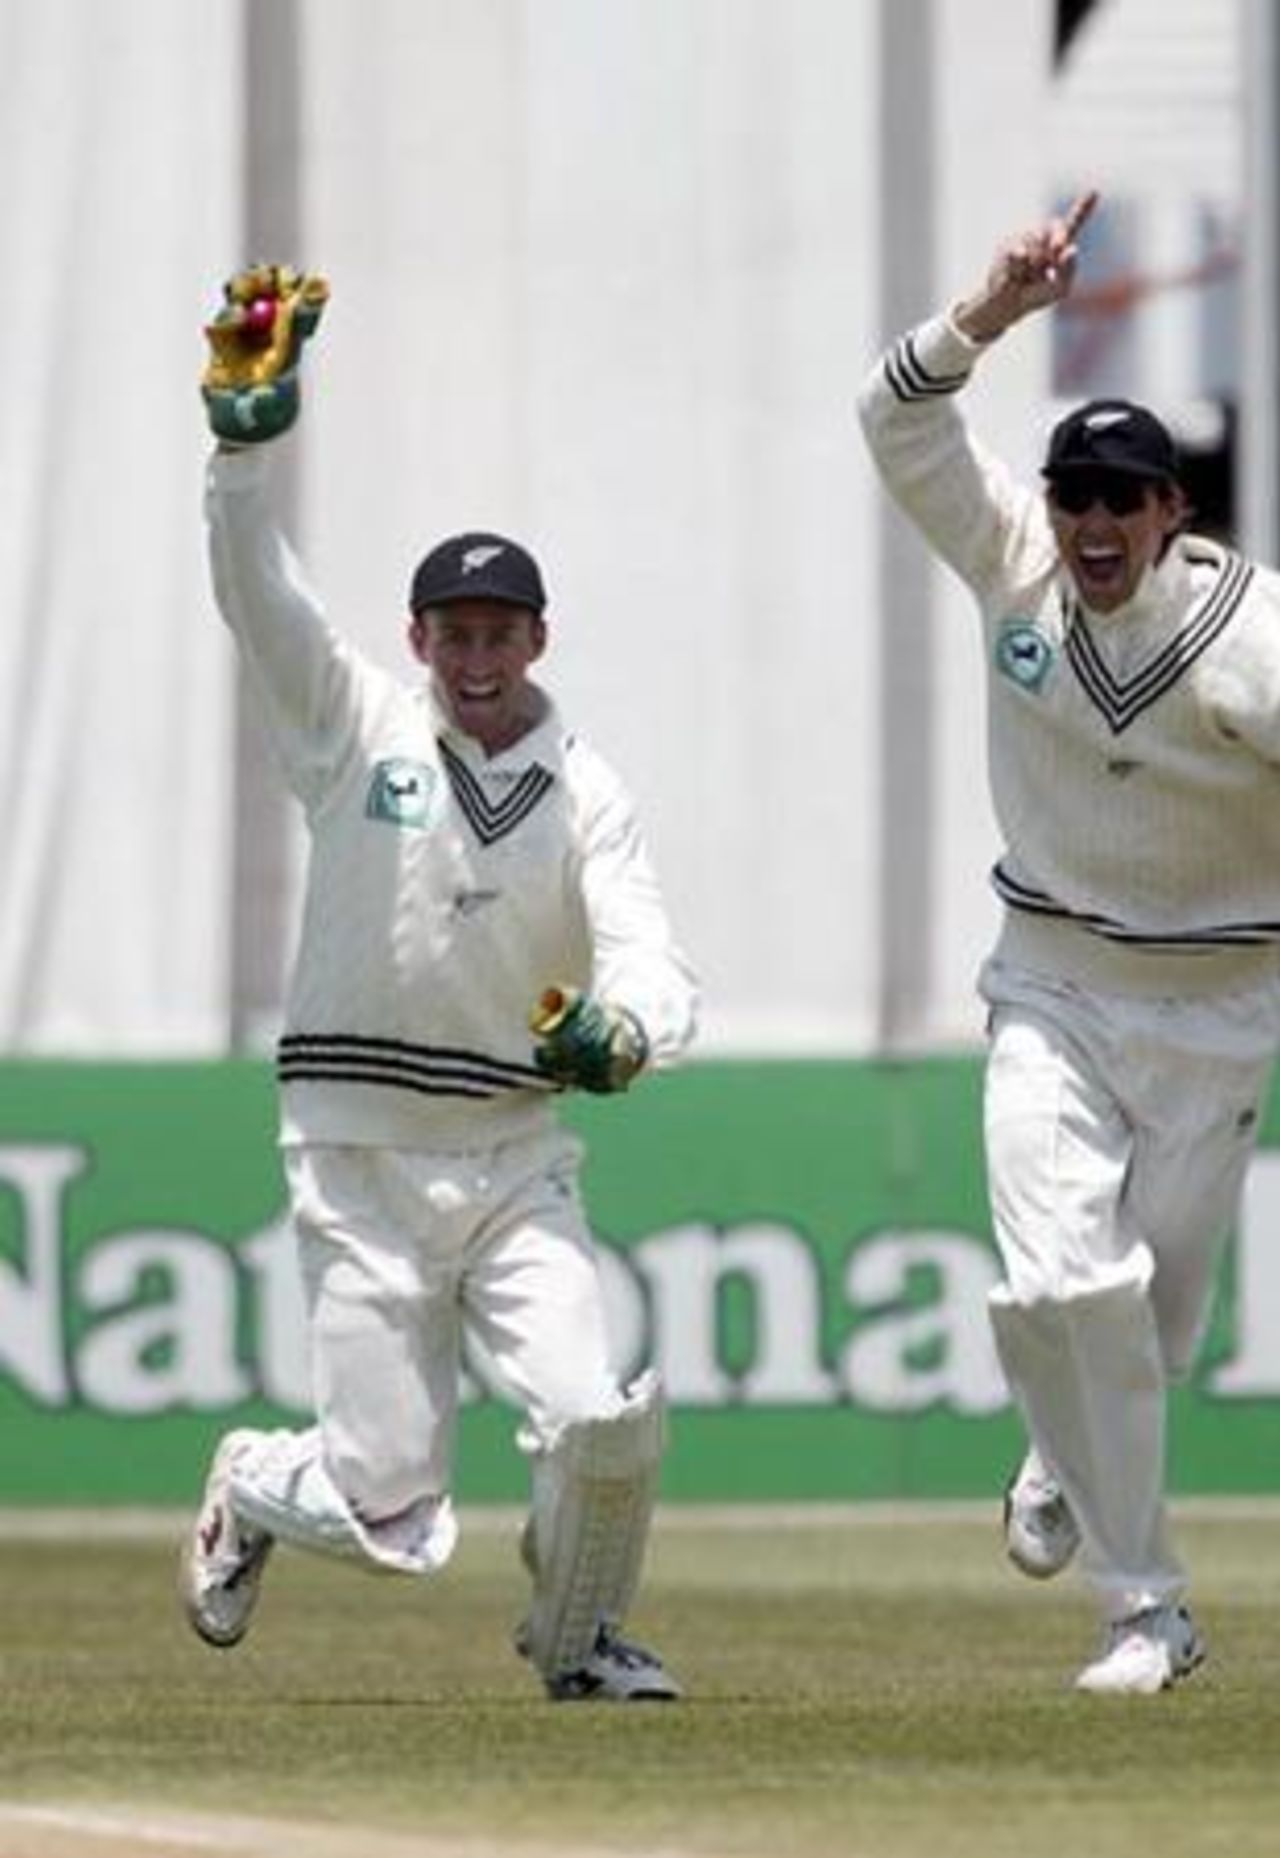 New Zealand wicket-keeper Robbie Hart (left) and team-mate Stephen Fleming celebrate the dismissal of Indian batsman Sourav Ganguly, caught by Hart off the bowling of Shane Bond for two. 1st Test: New Zealand v India at Basin Reserve, Wellington, 12-16 December 2002 (14 December 2002).